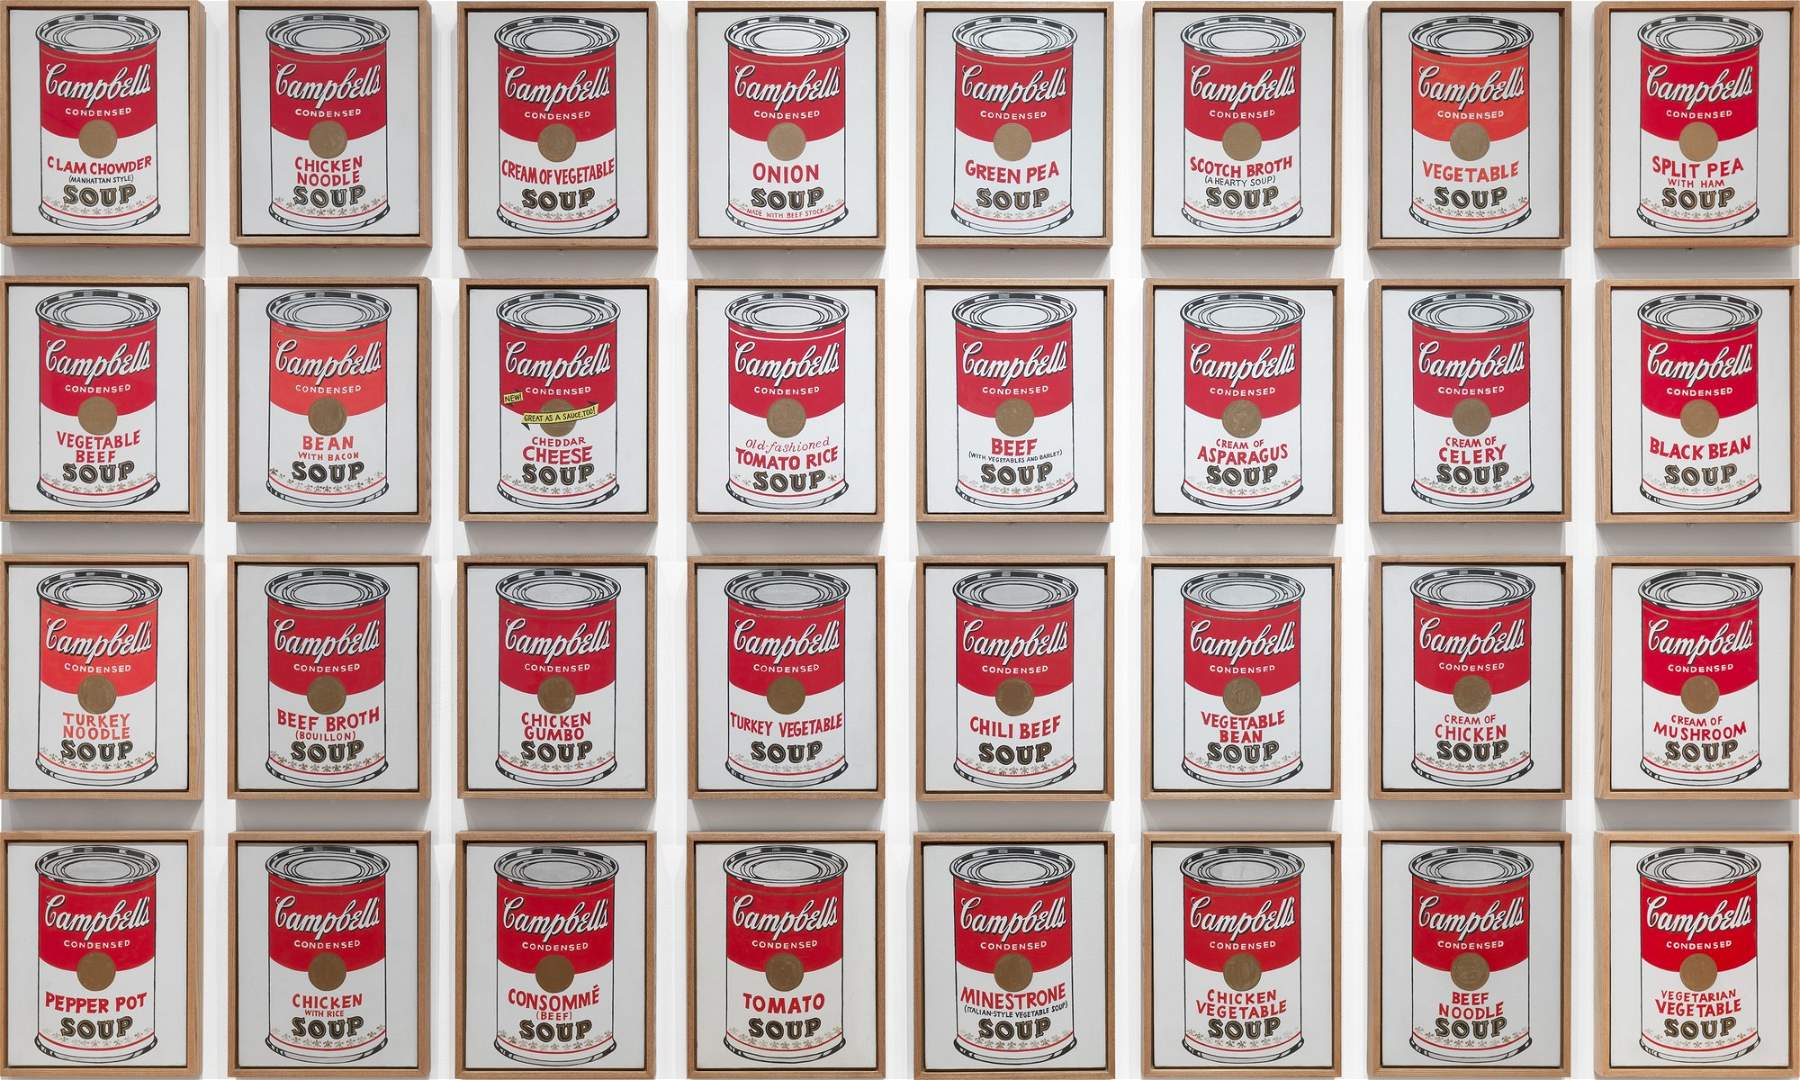 Andy Warhol: life and major works of the father of Pop Art